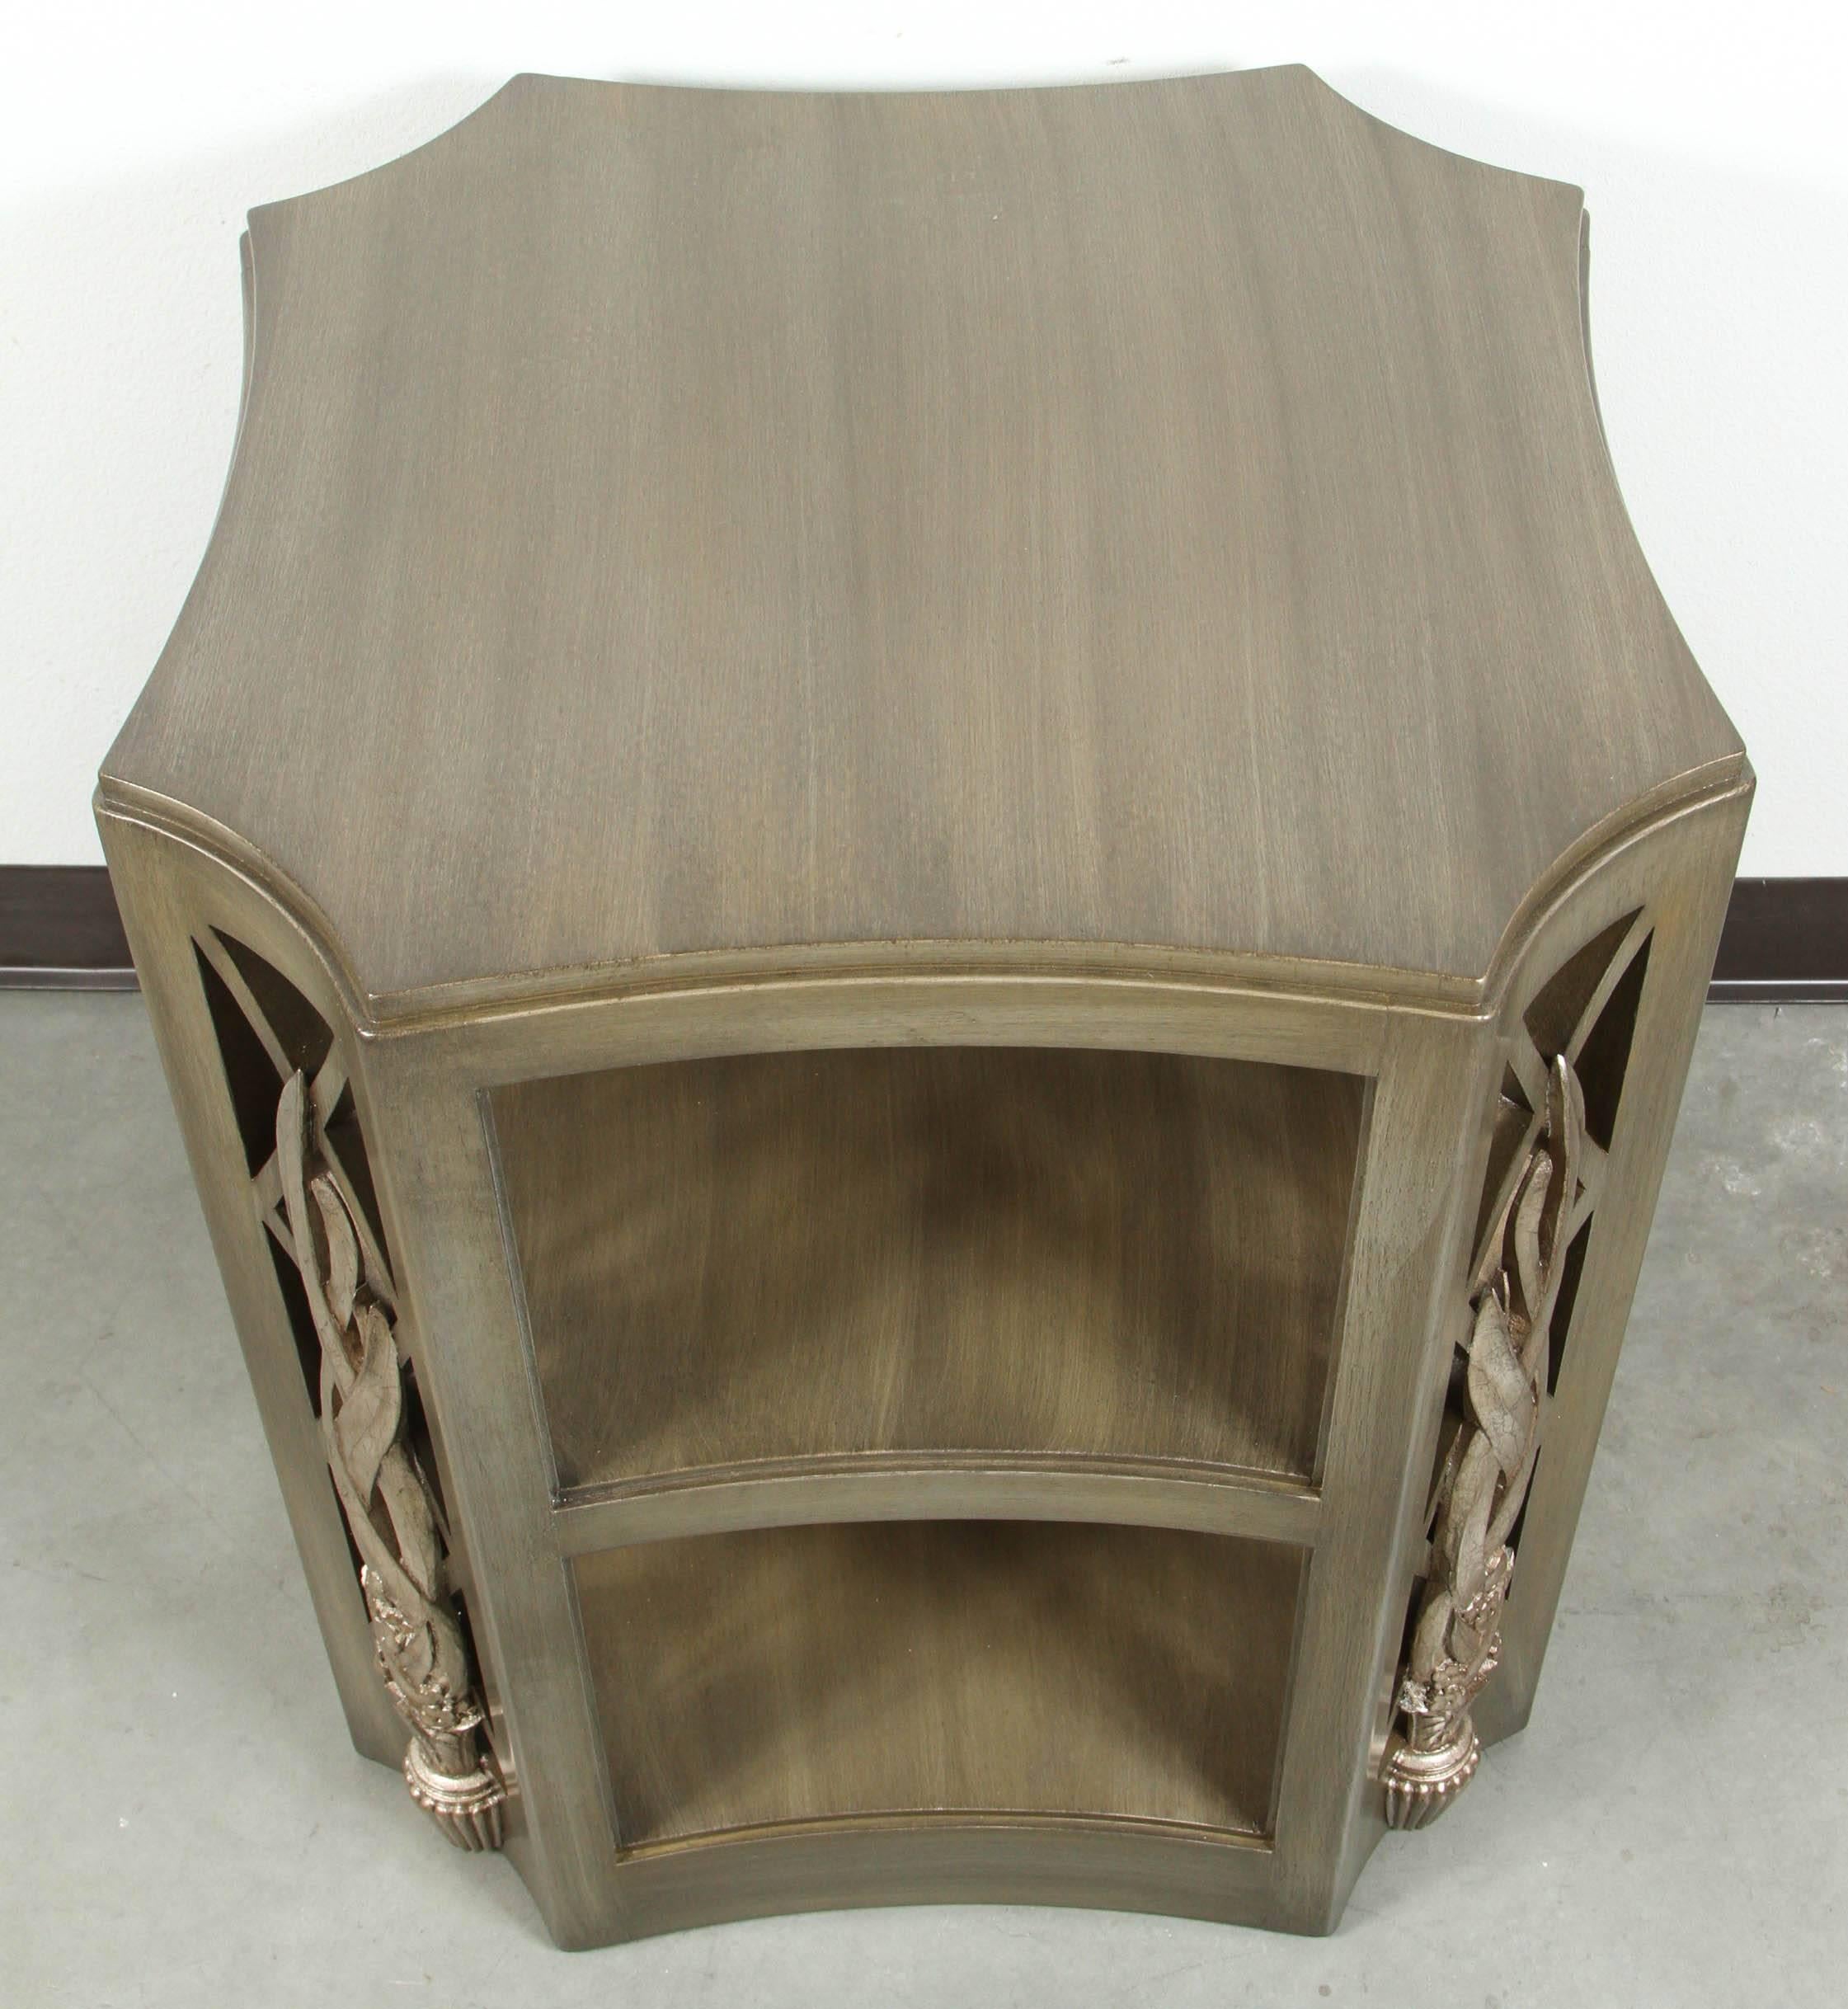 Exquisite Table by James Mont 4